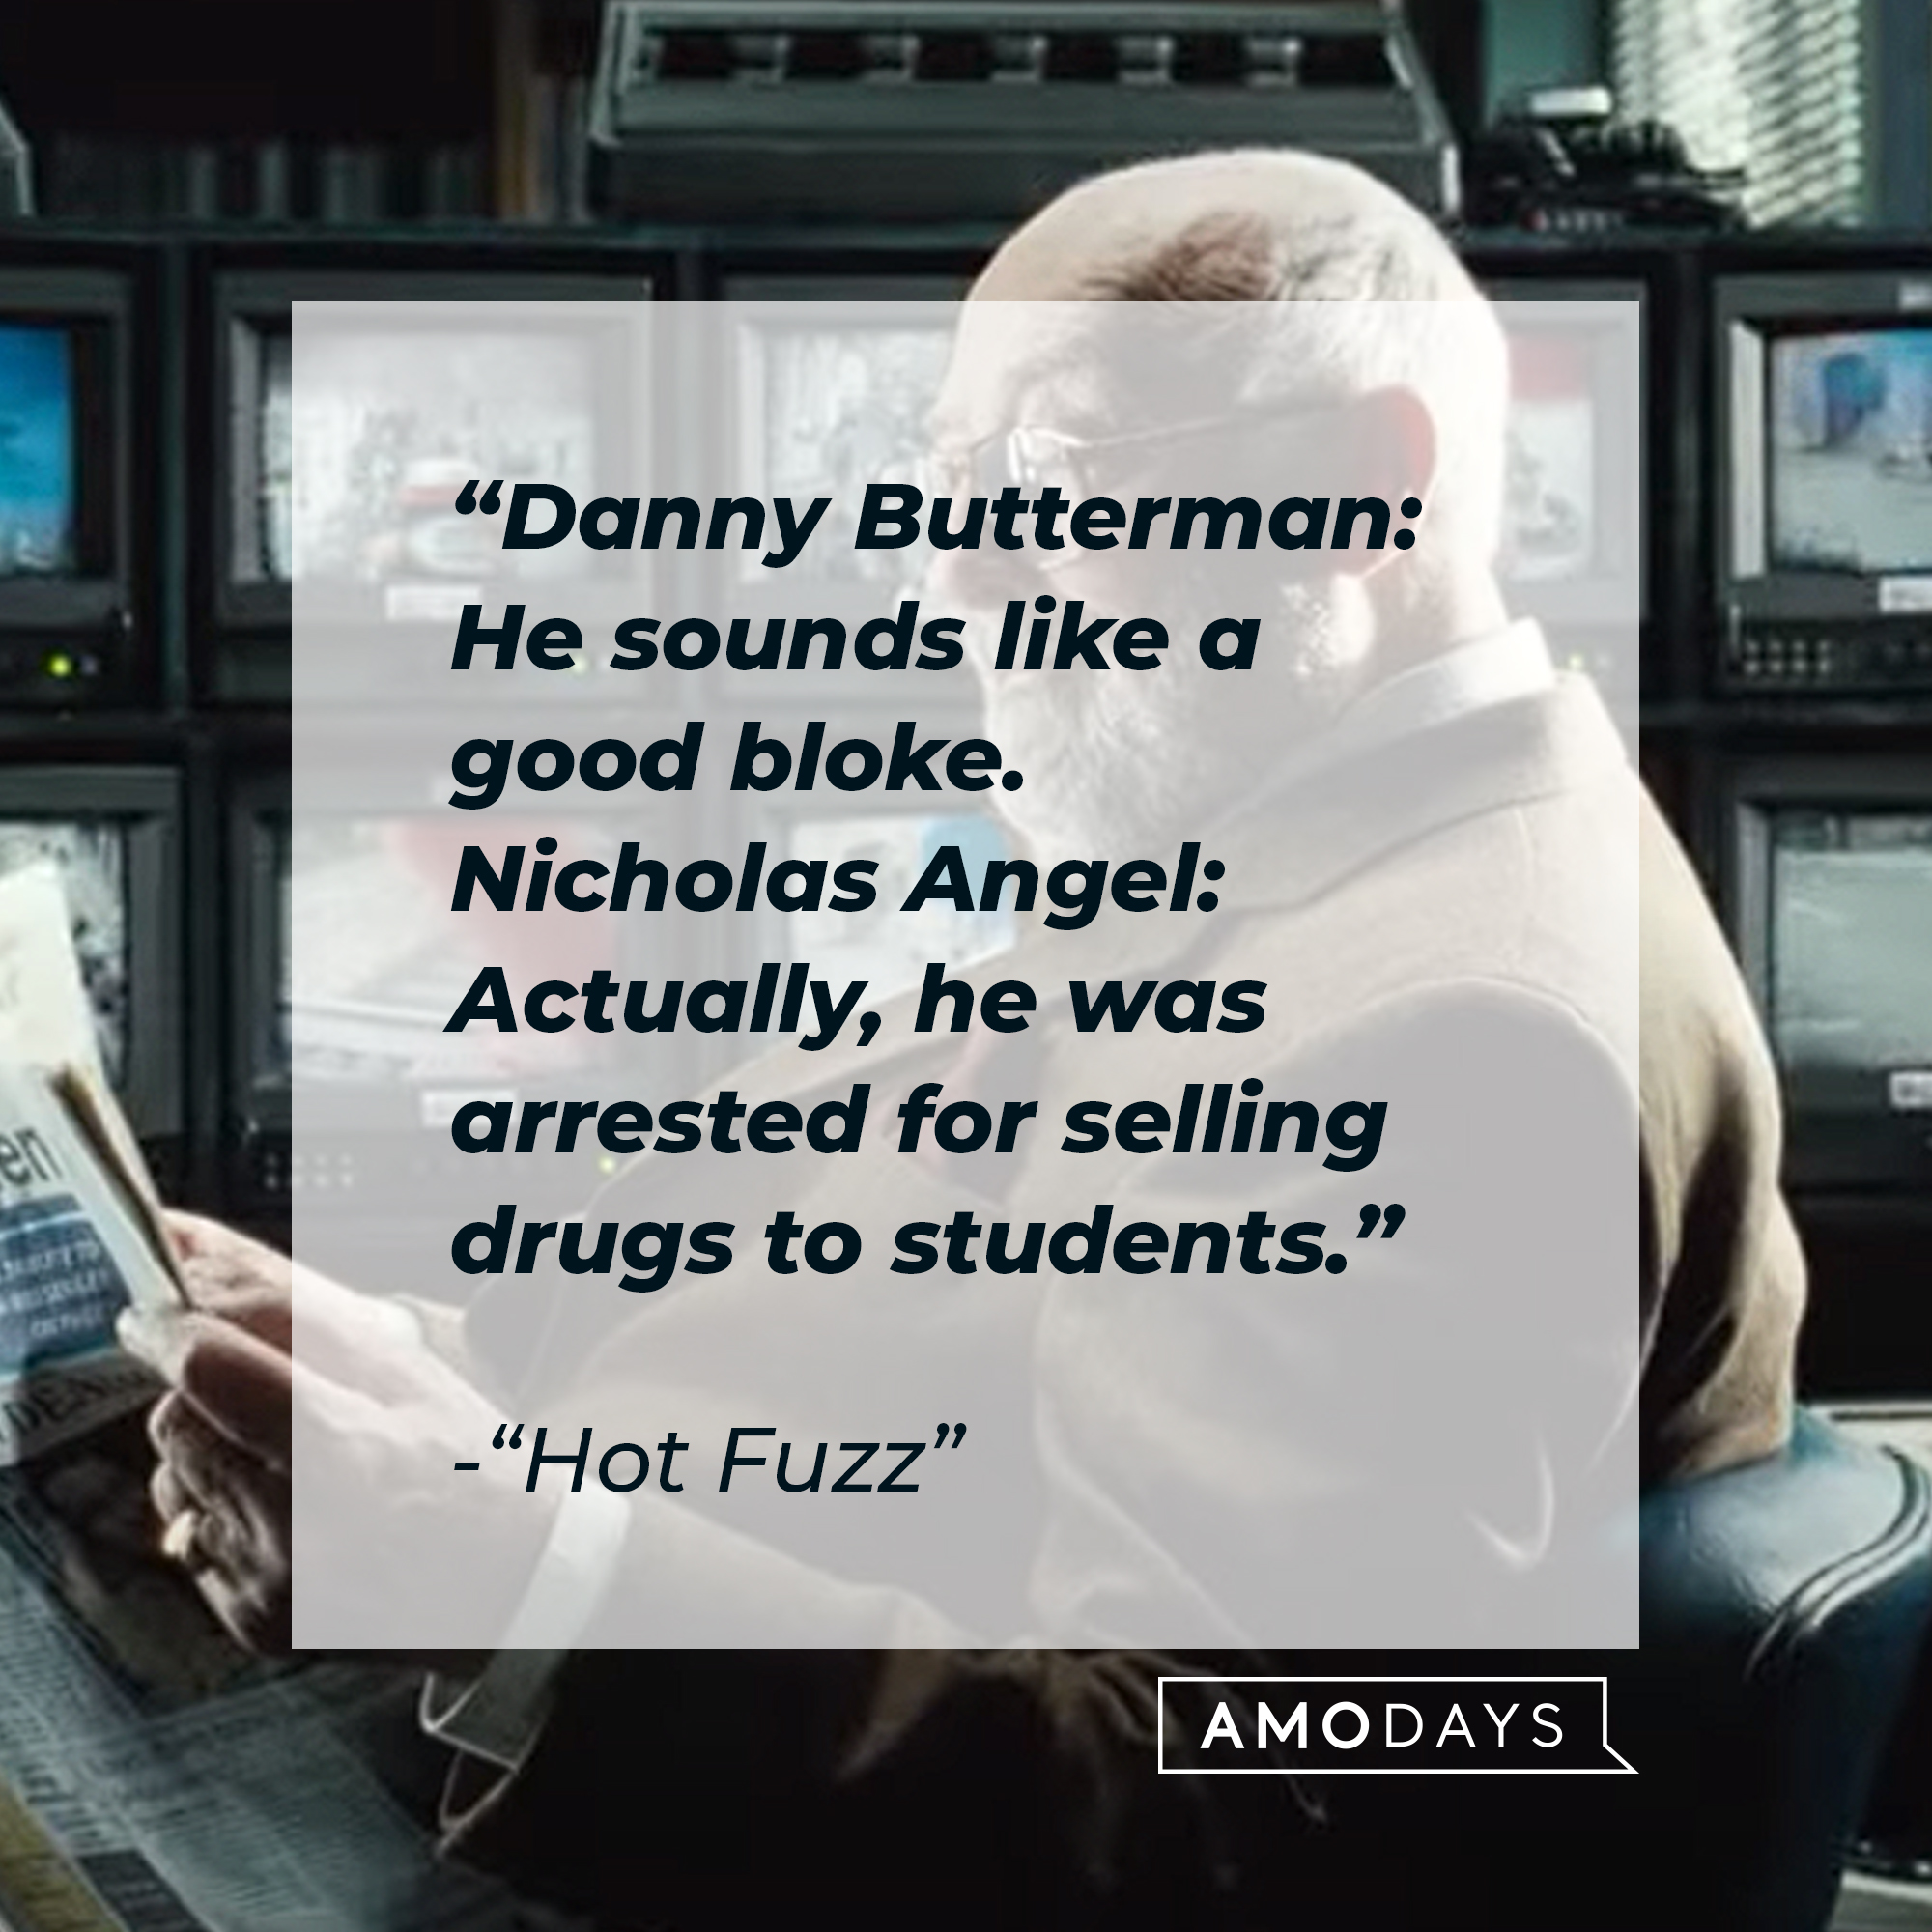 Nicholas Angel and Danny Butterman's quotes in "Hot Fuzz:" “Danny Butterman: He sounds like a good bloke. Nicholas Angel: Actually, he was arrested for selling drugs to students.” | Source: Youtube.com/UniversalPictures